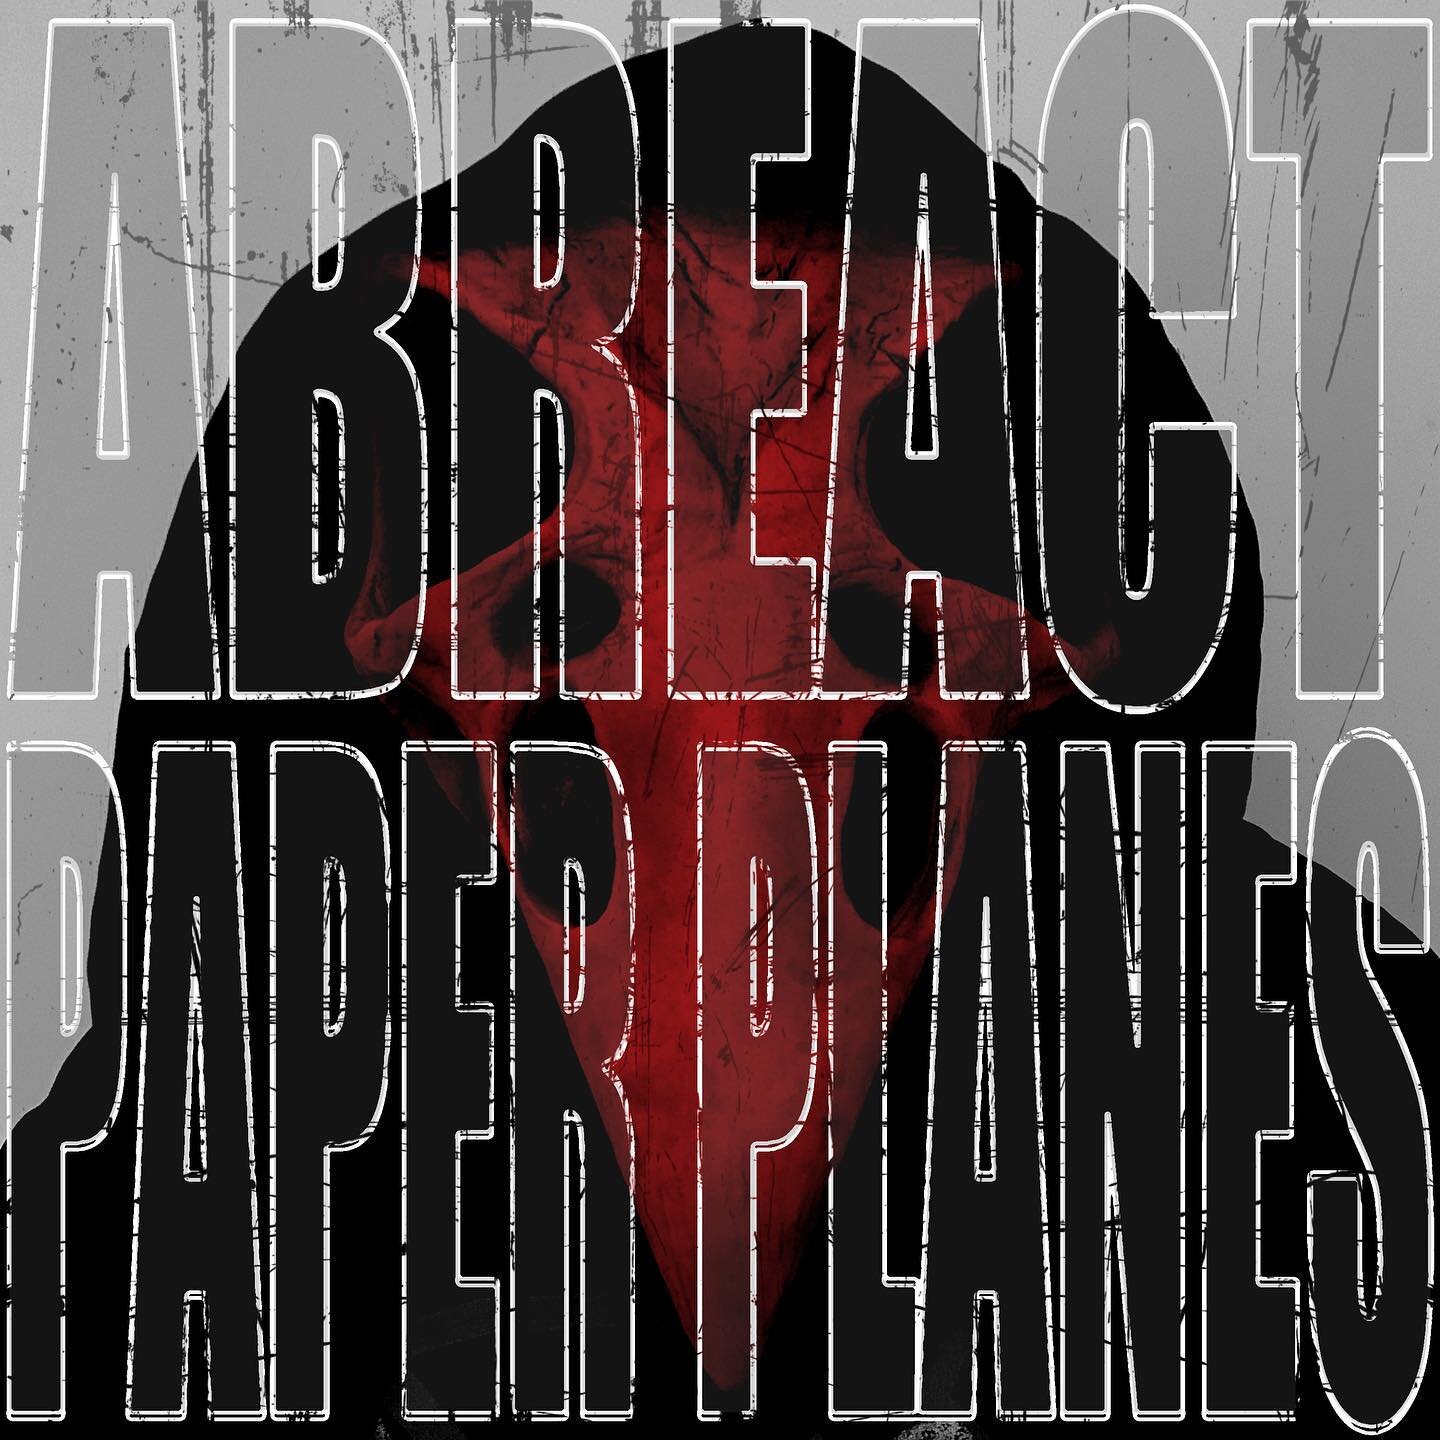 ***Our single 'Paper Planes' releases worldwide 04/09/20***

Well, it has been some time coming but we are now finally here!  Our new single 'Paper Planes' will leave the hangar and fly into your ears Friday September 4th at 12am worldwide in digital